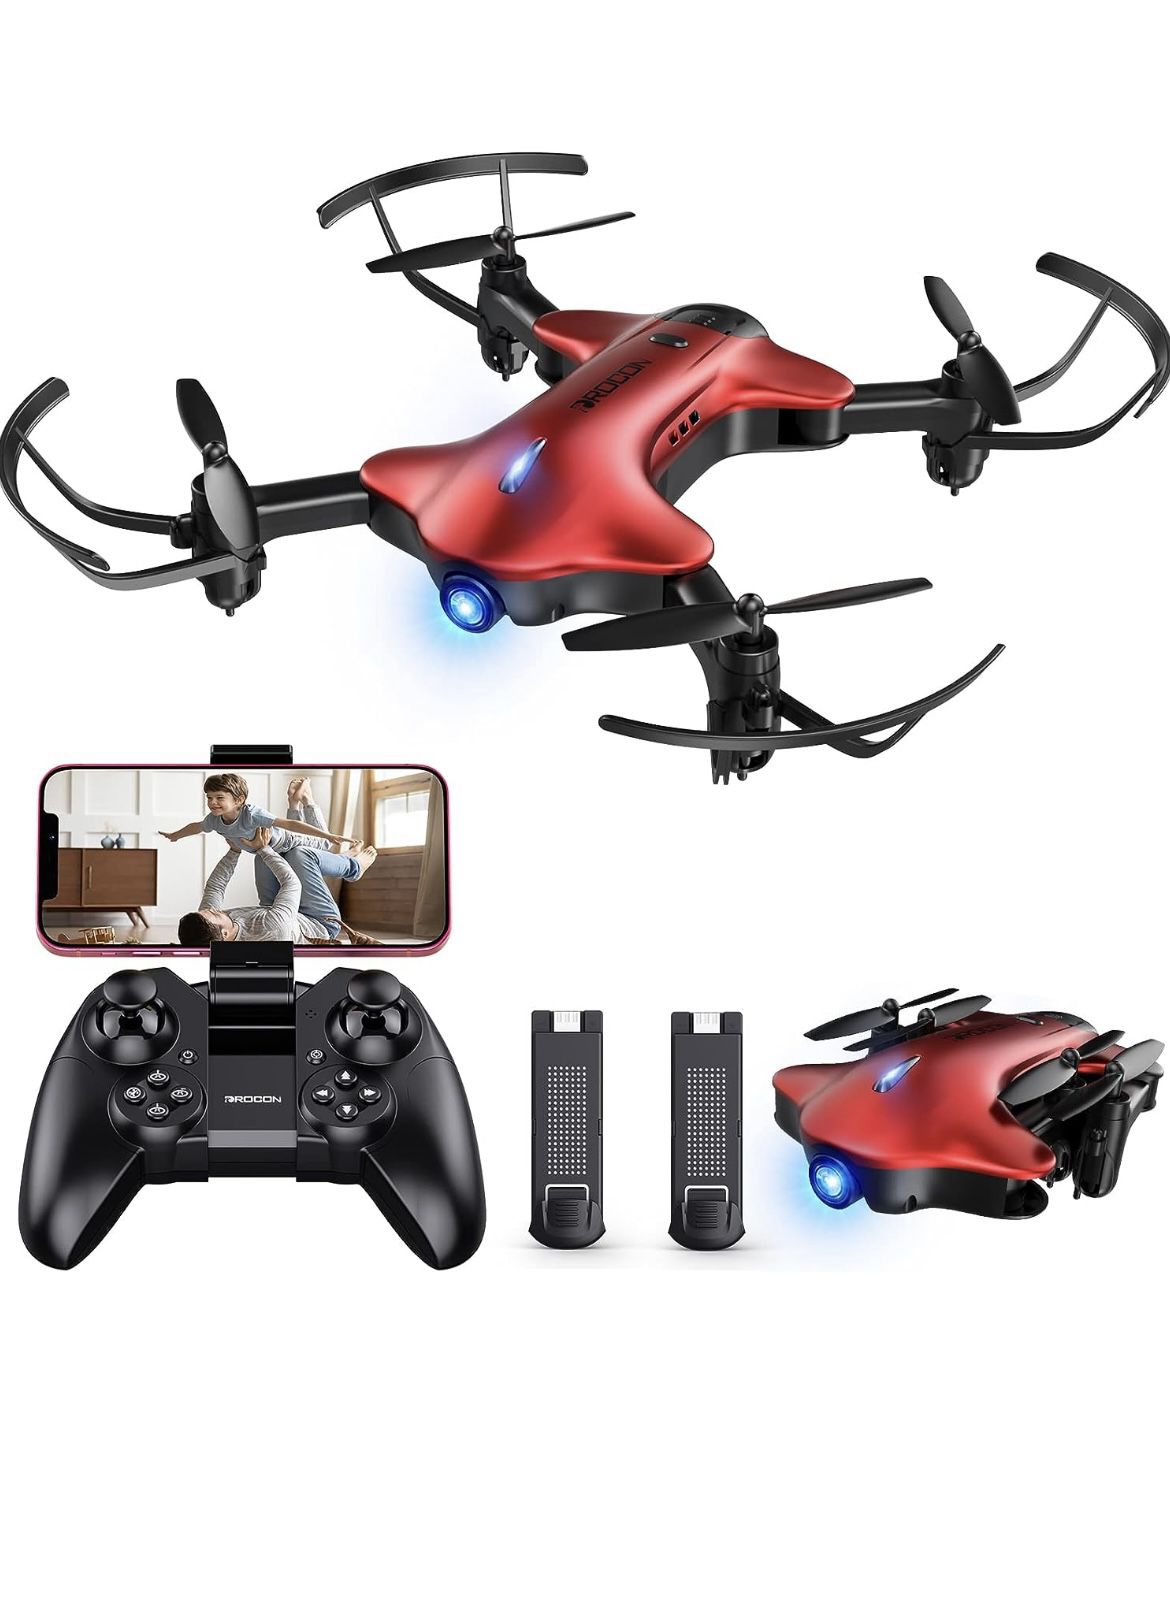 Brand New Drone for Kids, Spacekey FPV Wi-Fi Drone with Camera 1080P FHD, Real-time Video Feed, Great Drone for Beginners, Quadcopter Drone with Altit